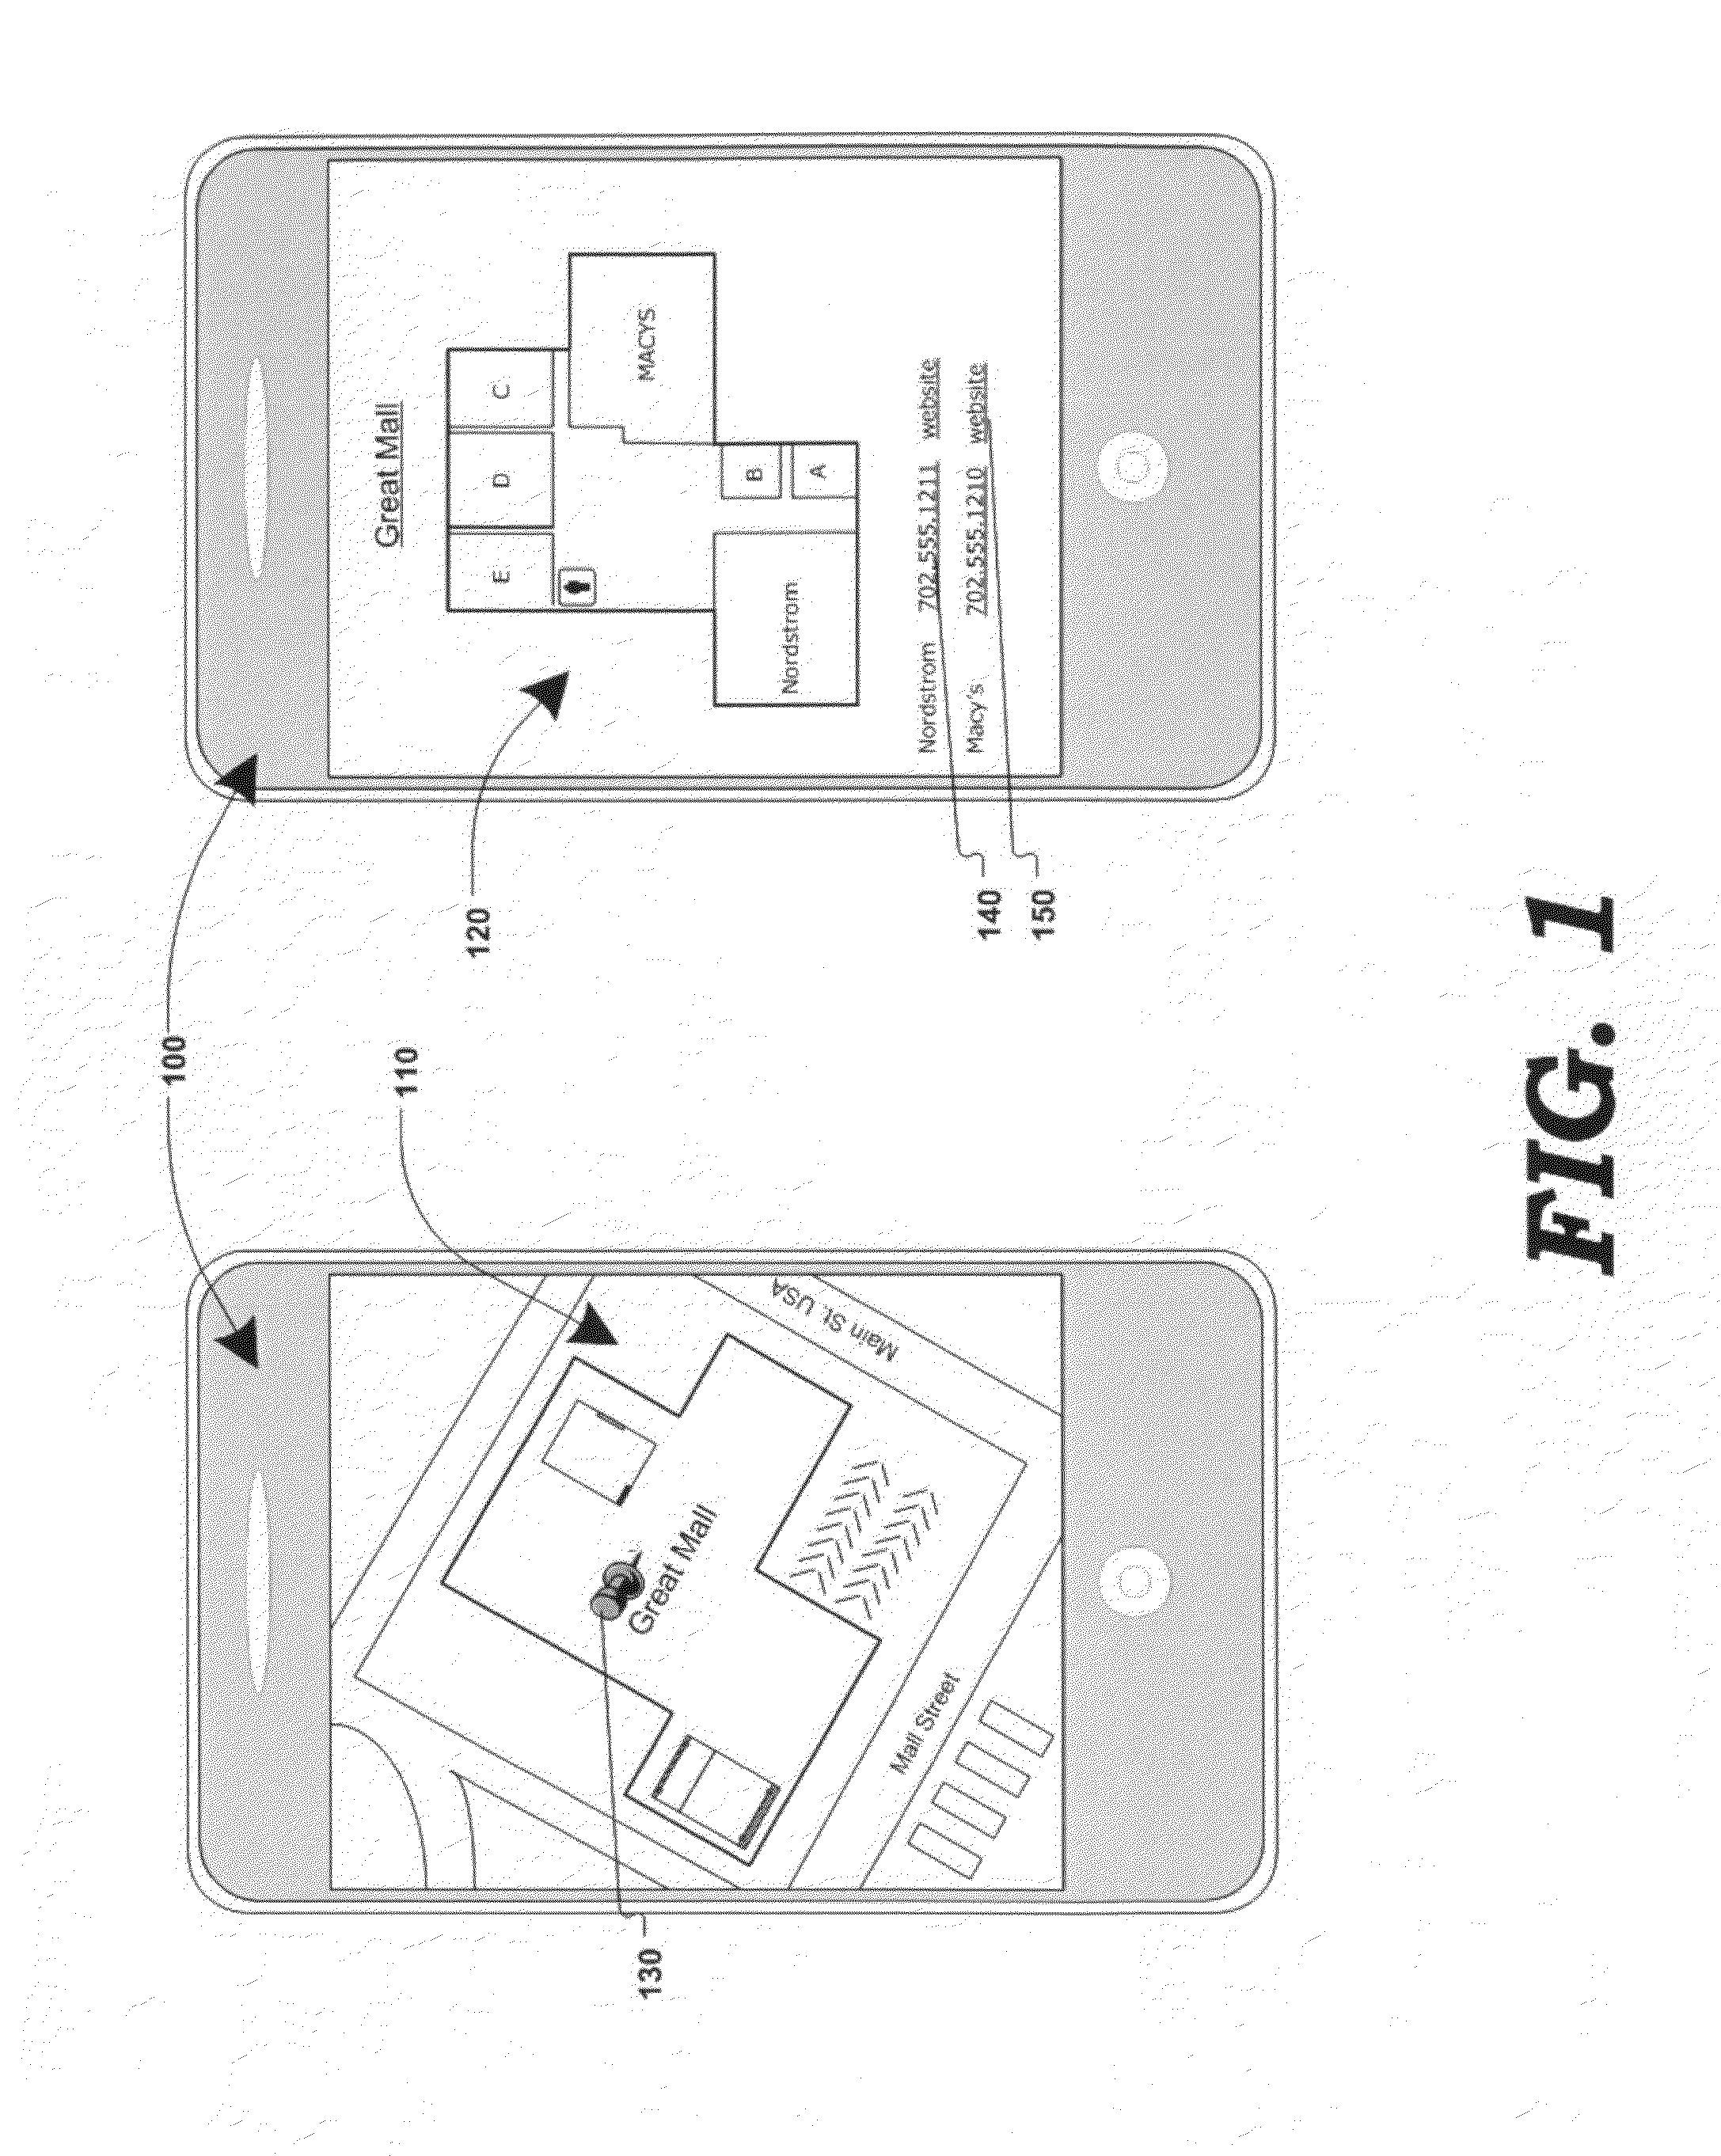 Method and system for associating content with map zoom function